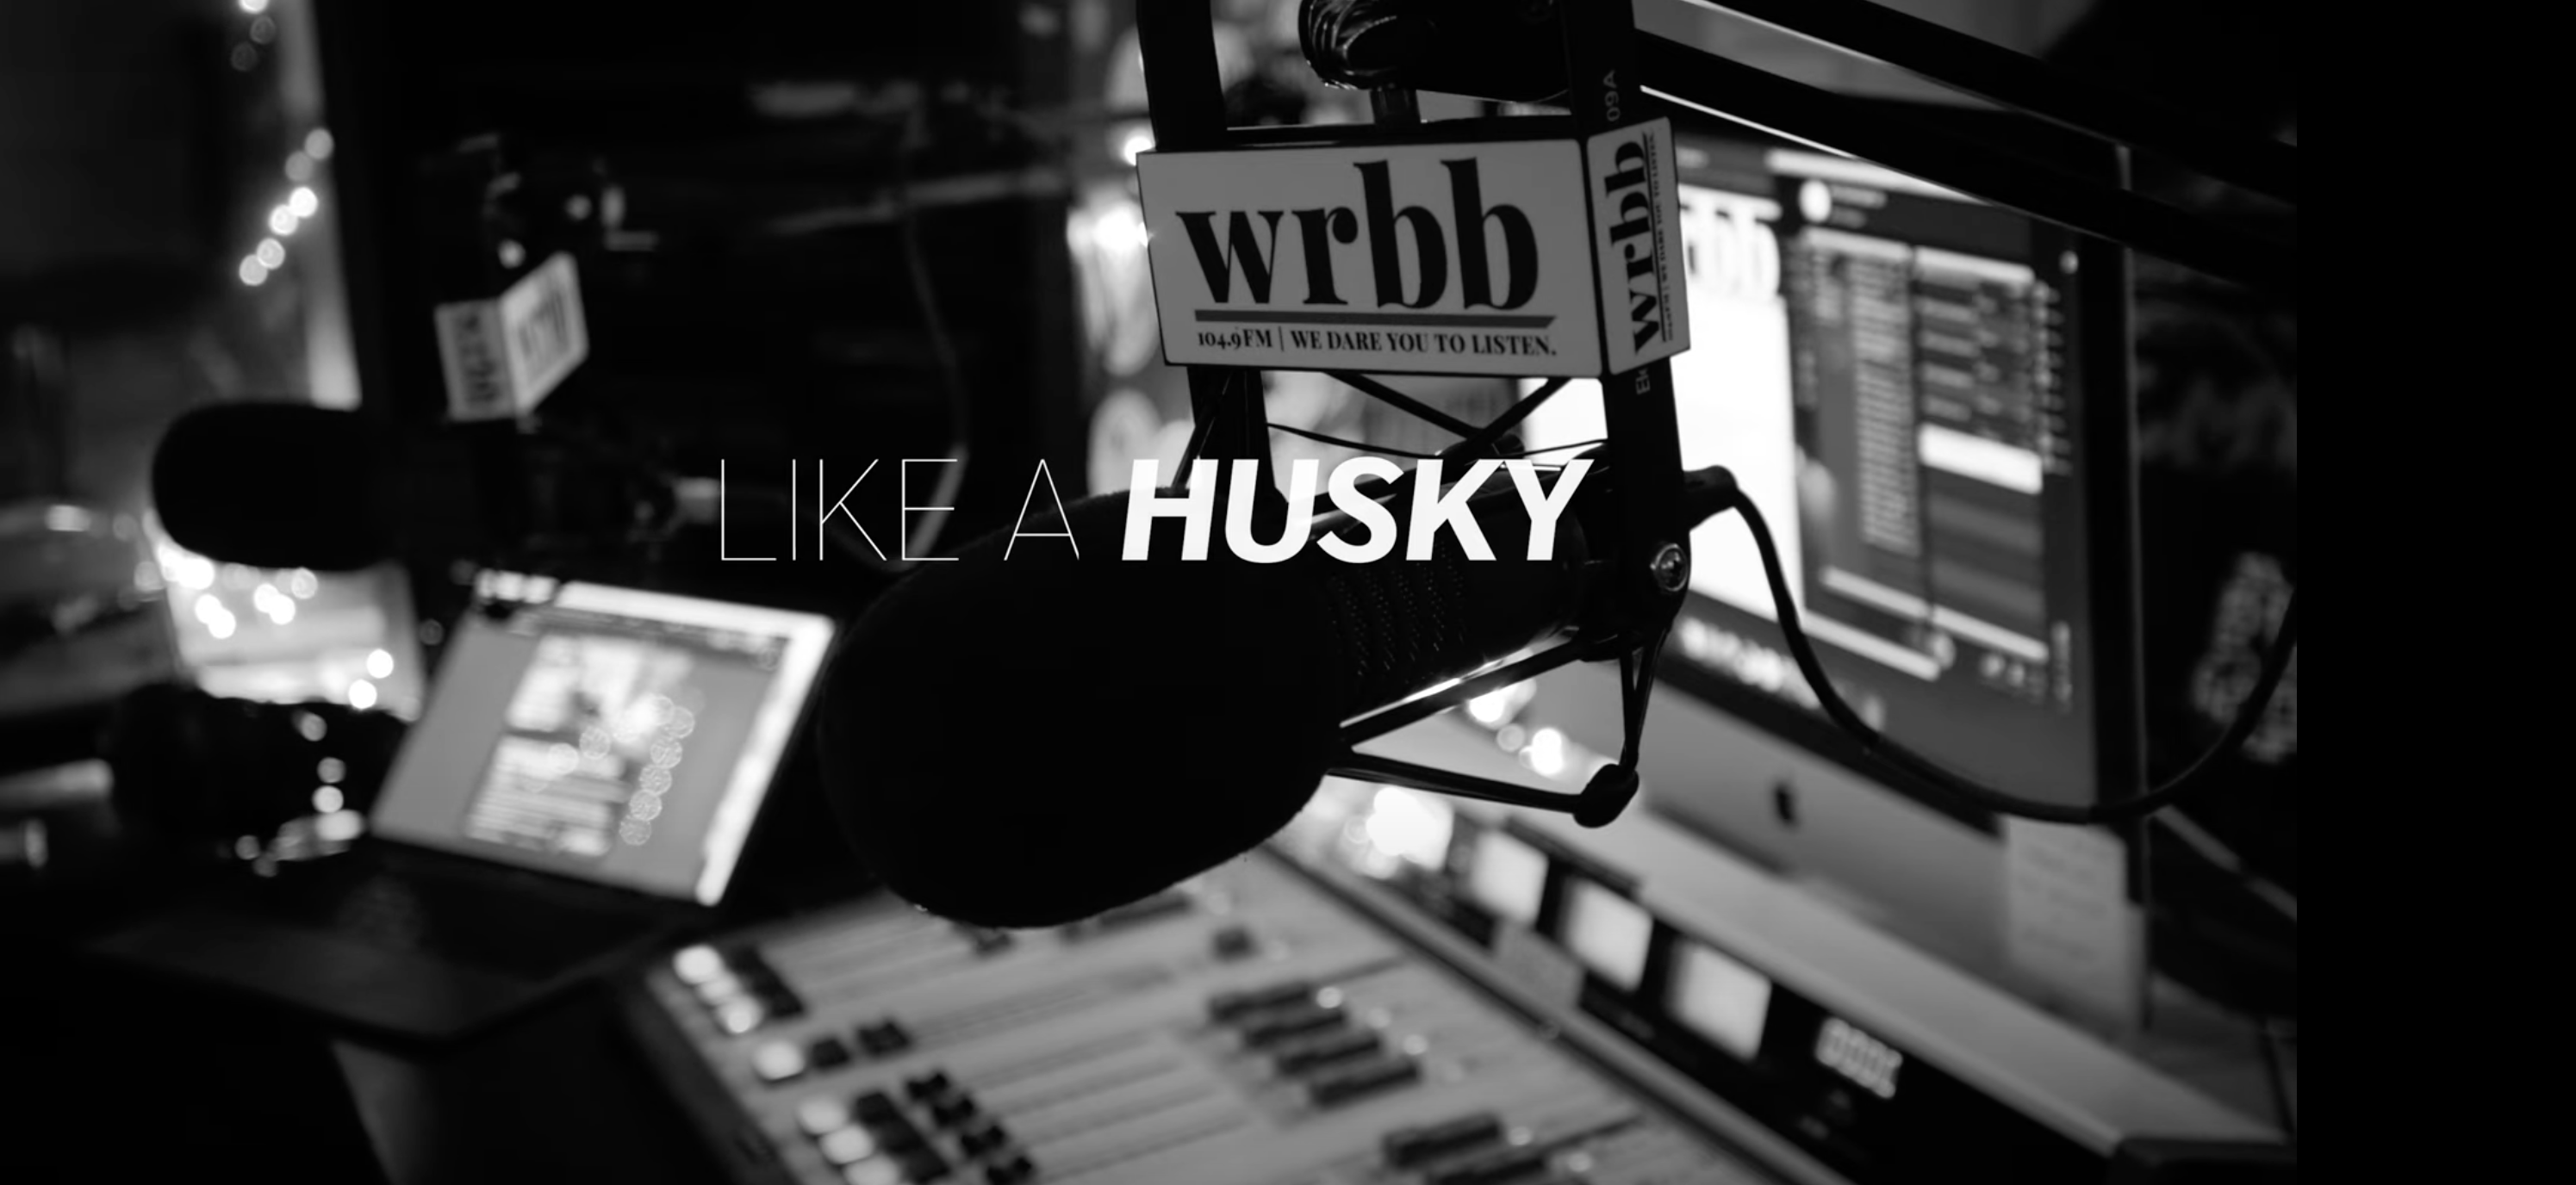 WRBB featured in the “Like a Husky” minidoc series